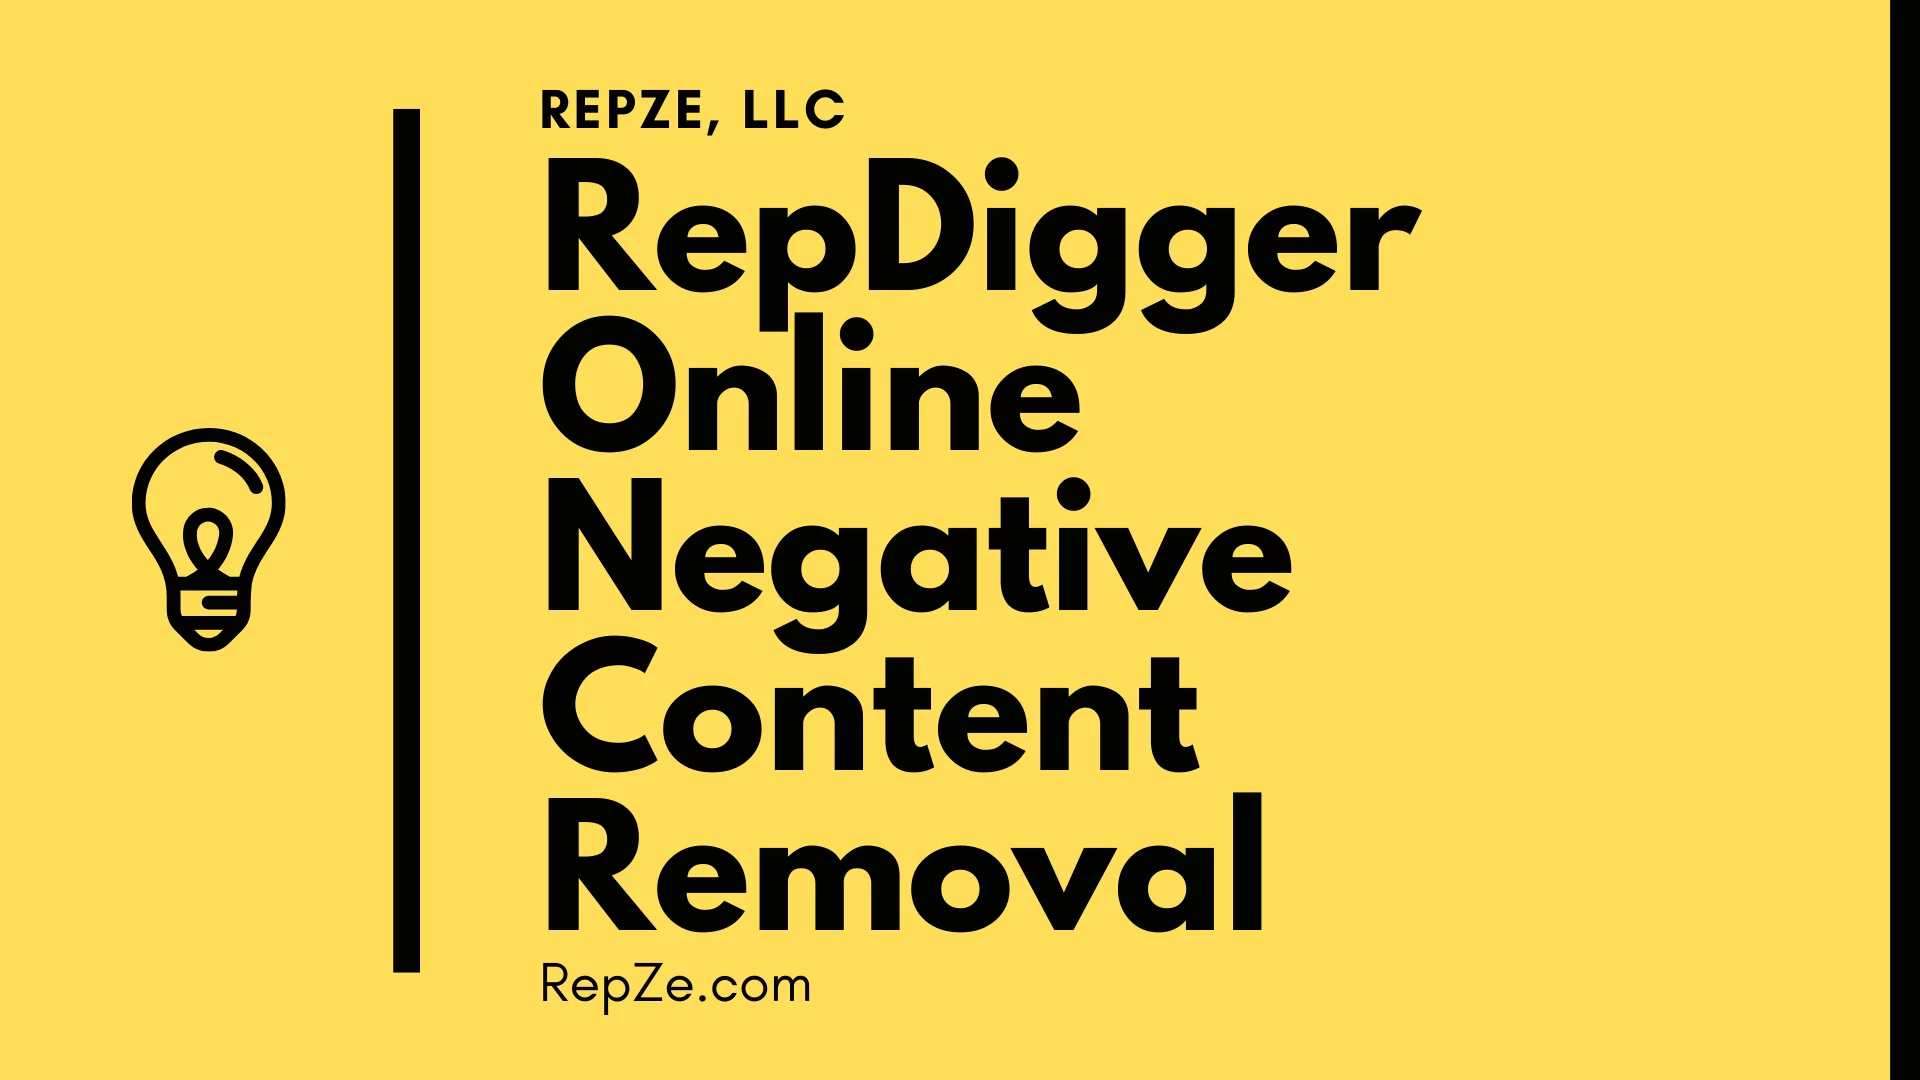 RepDigger.com Negative Content Removal From The Internet